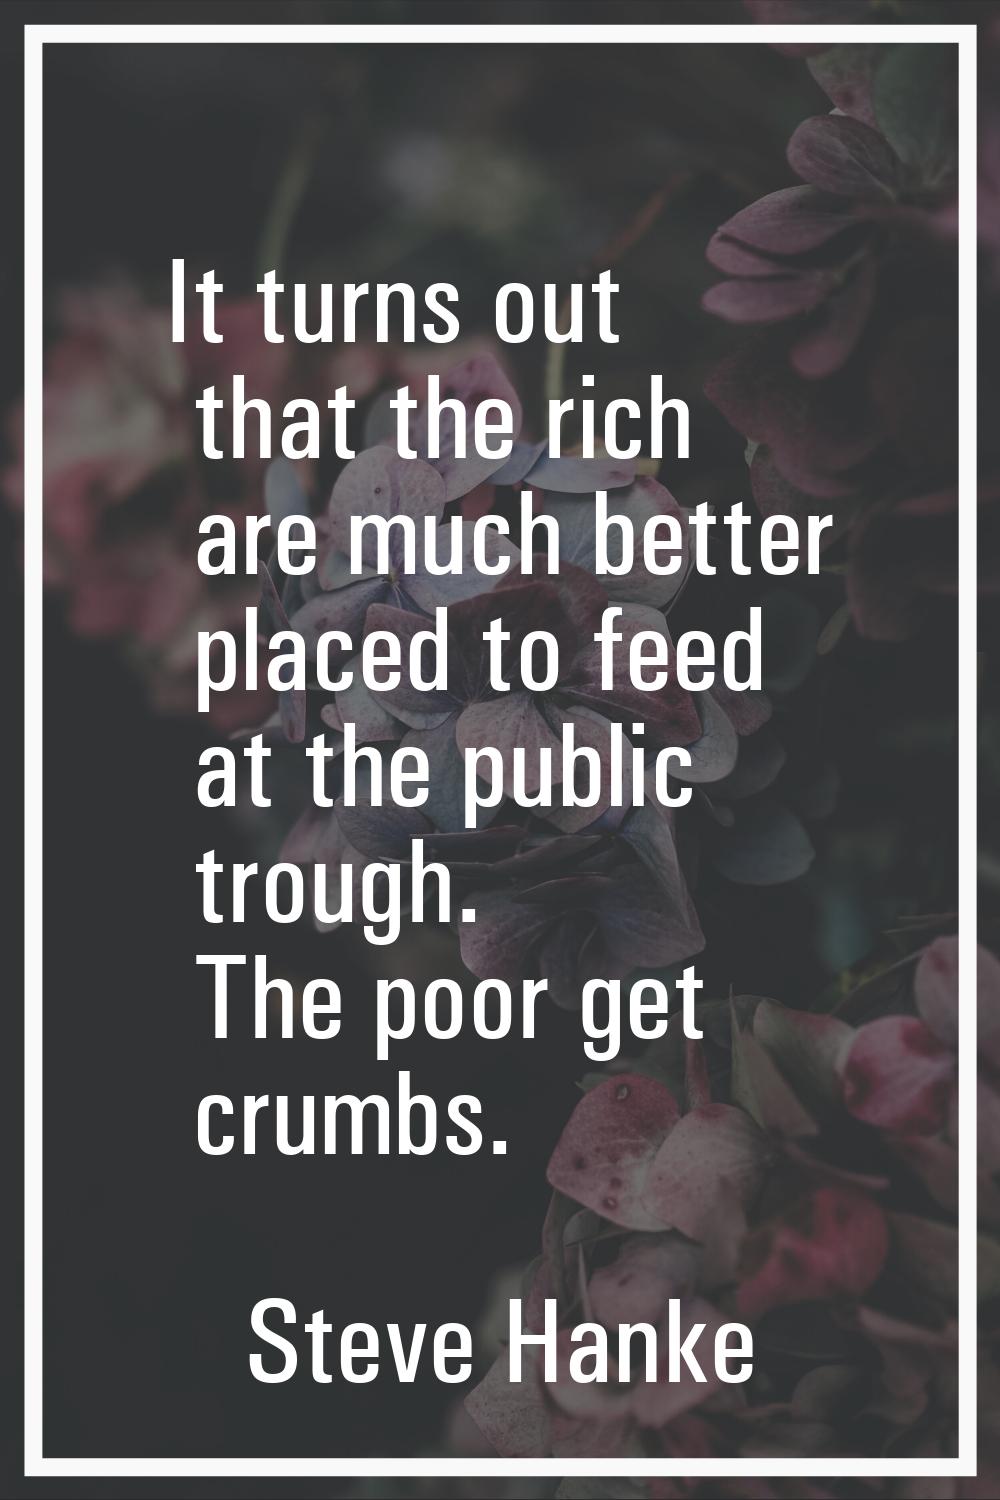 It turns out that the rich are much better placed to feed at the public trough. The poor get crumbs